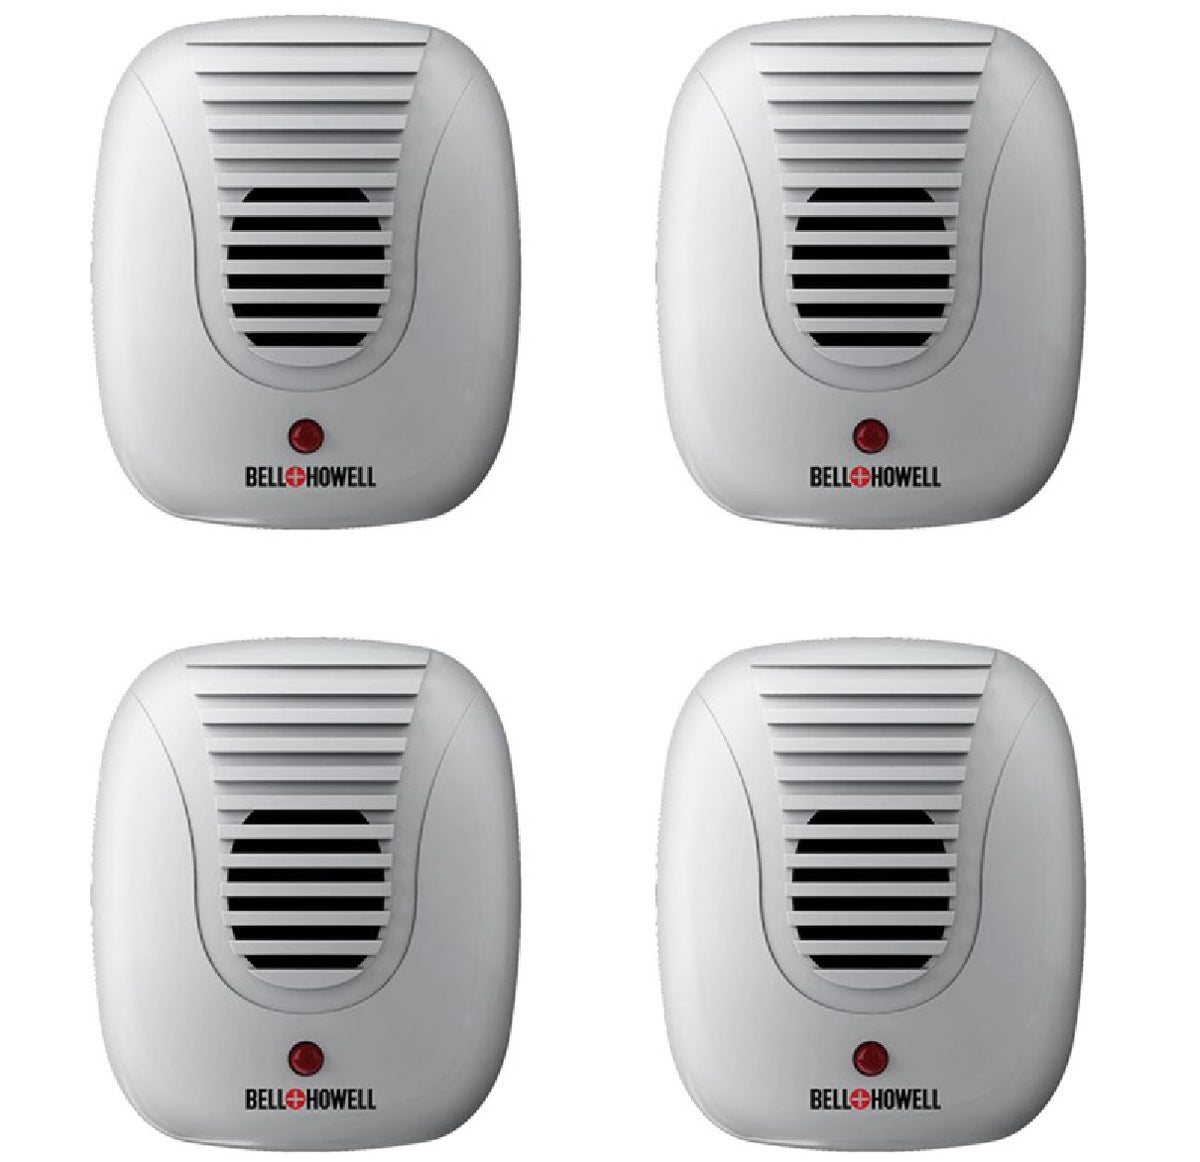 Bell + Howell Classic Ultrasonic Electronic Indoor Pest Repeller (4-Pack)  50167 - The Home Depot